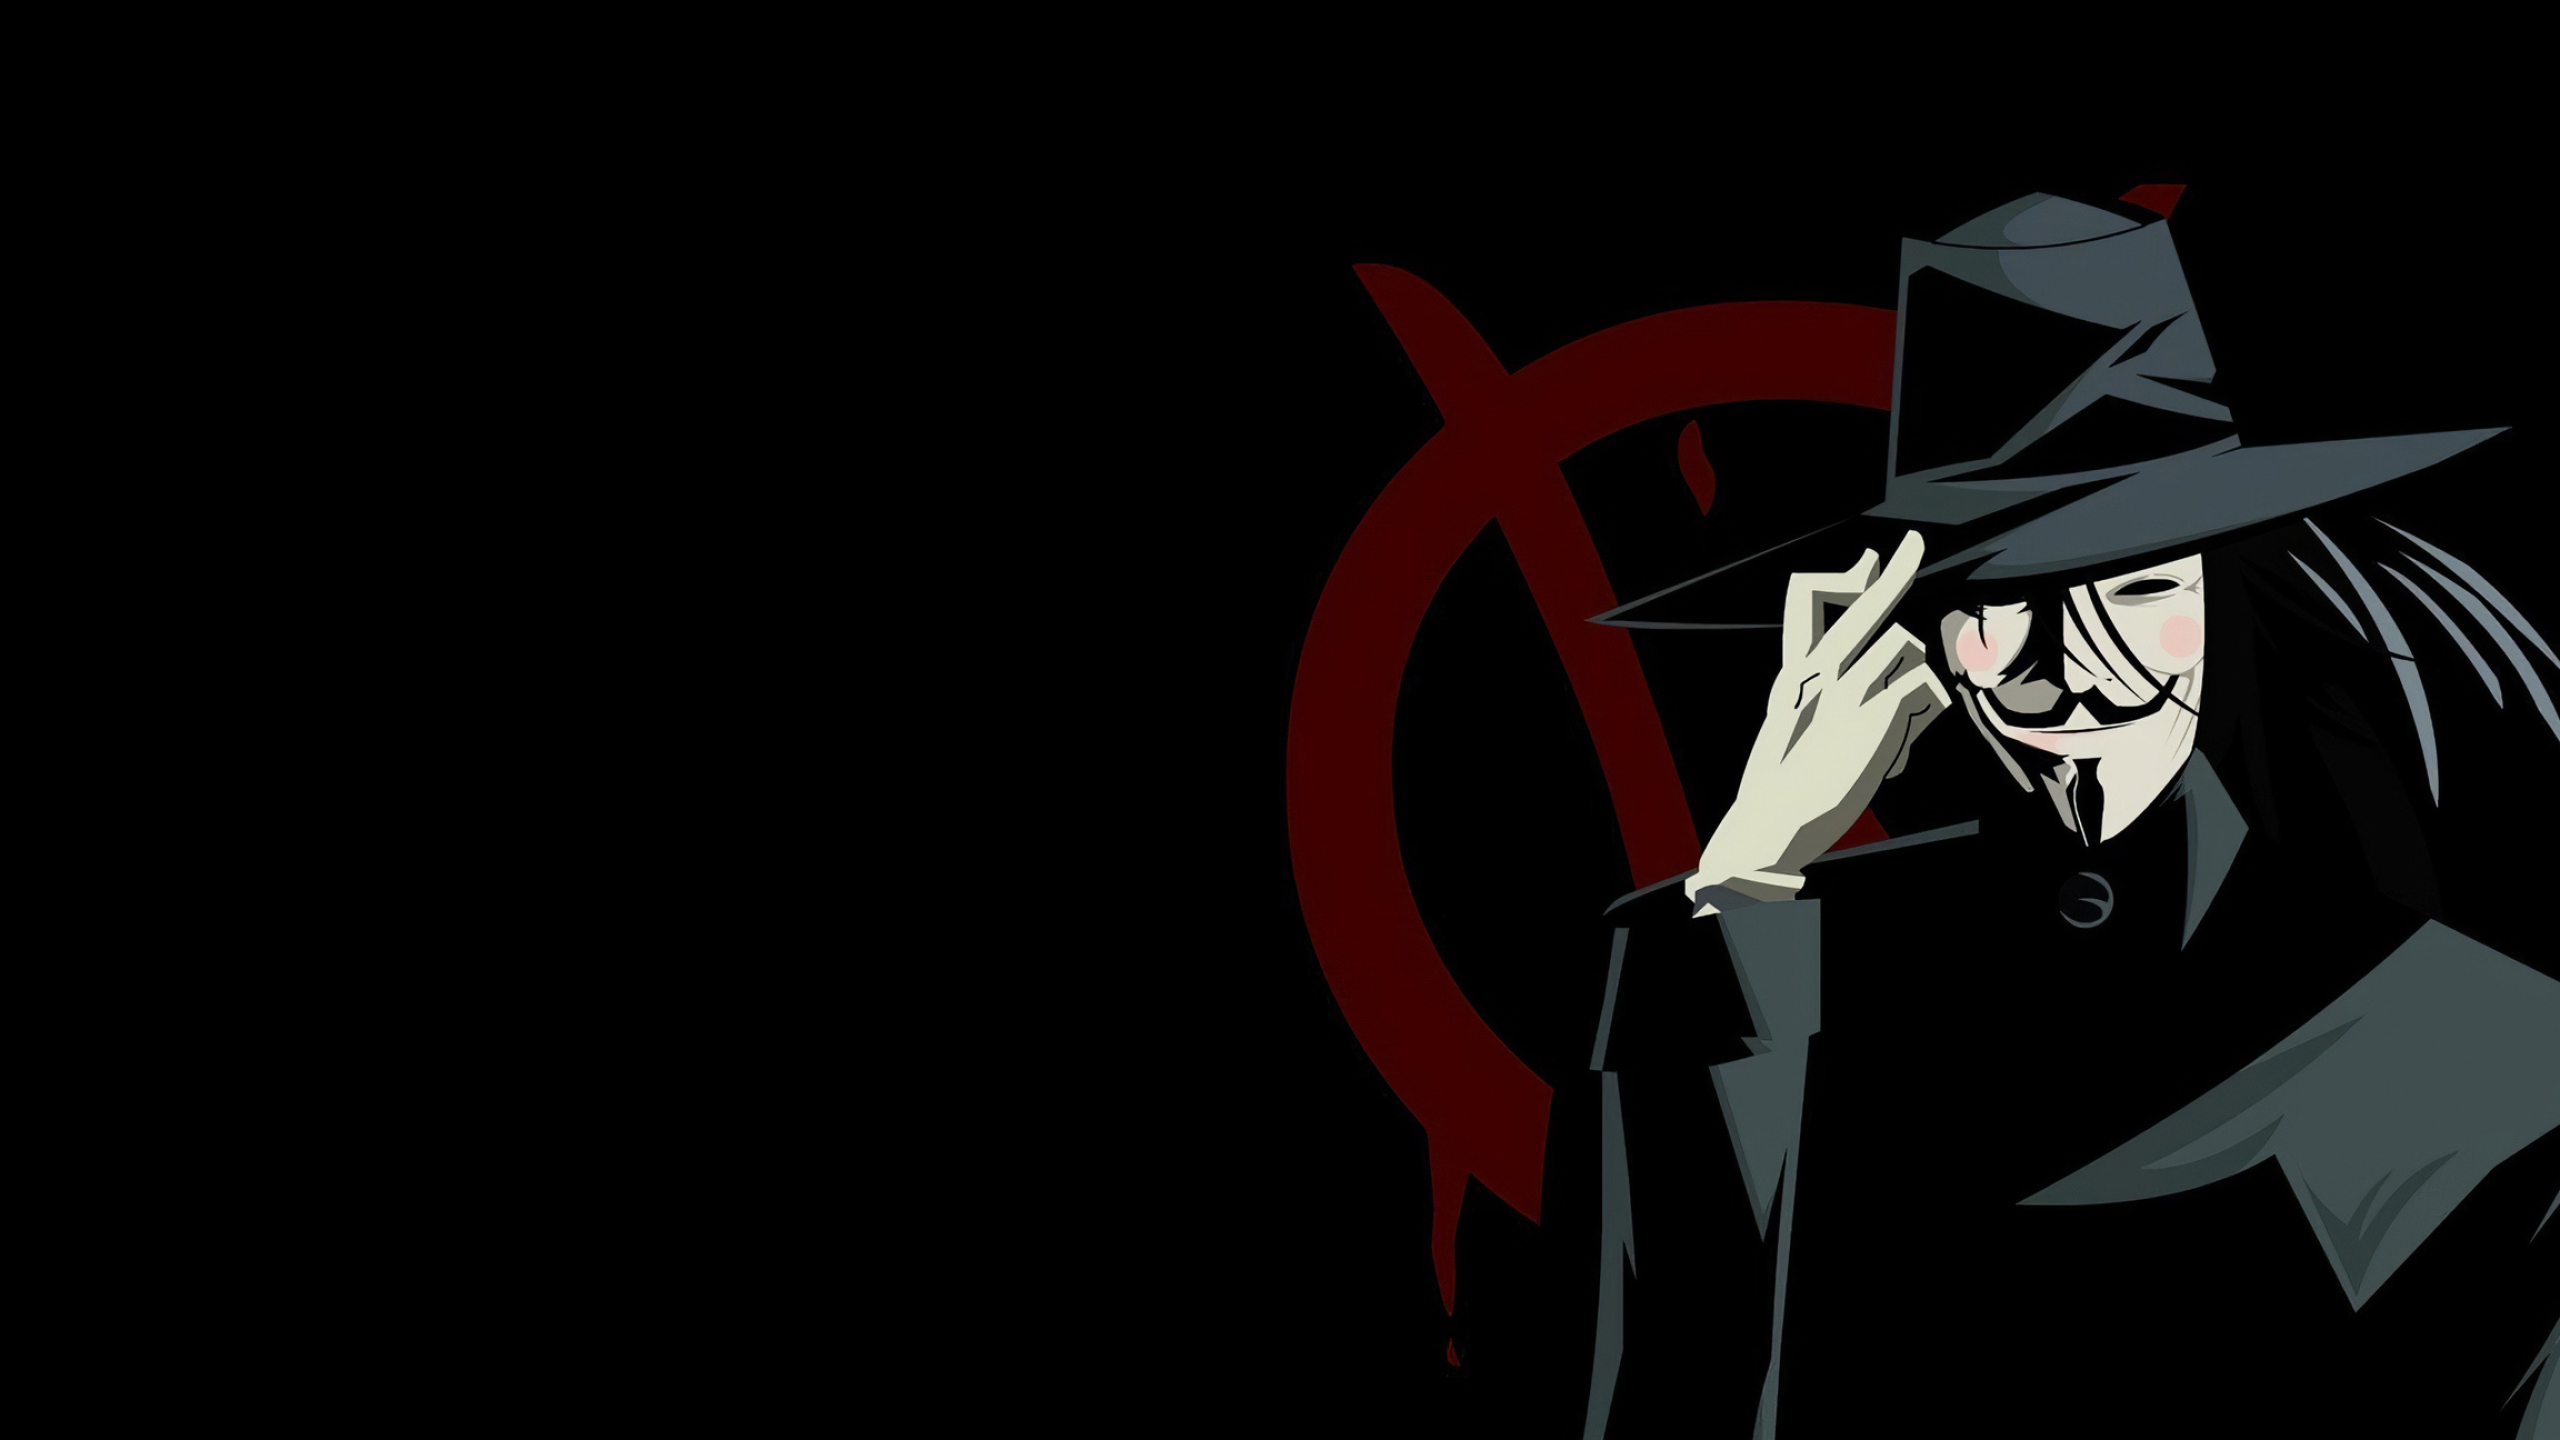 V for Vendetta: A British graphic novel, An anarchist revolutionary dressed in a Guy Fawkes mask. 2560x1440 HD Background.